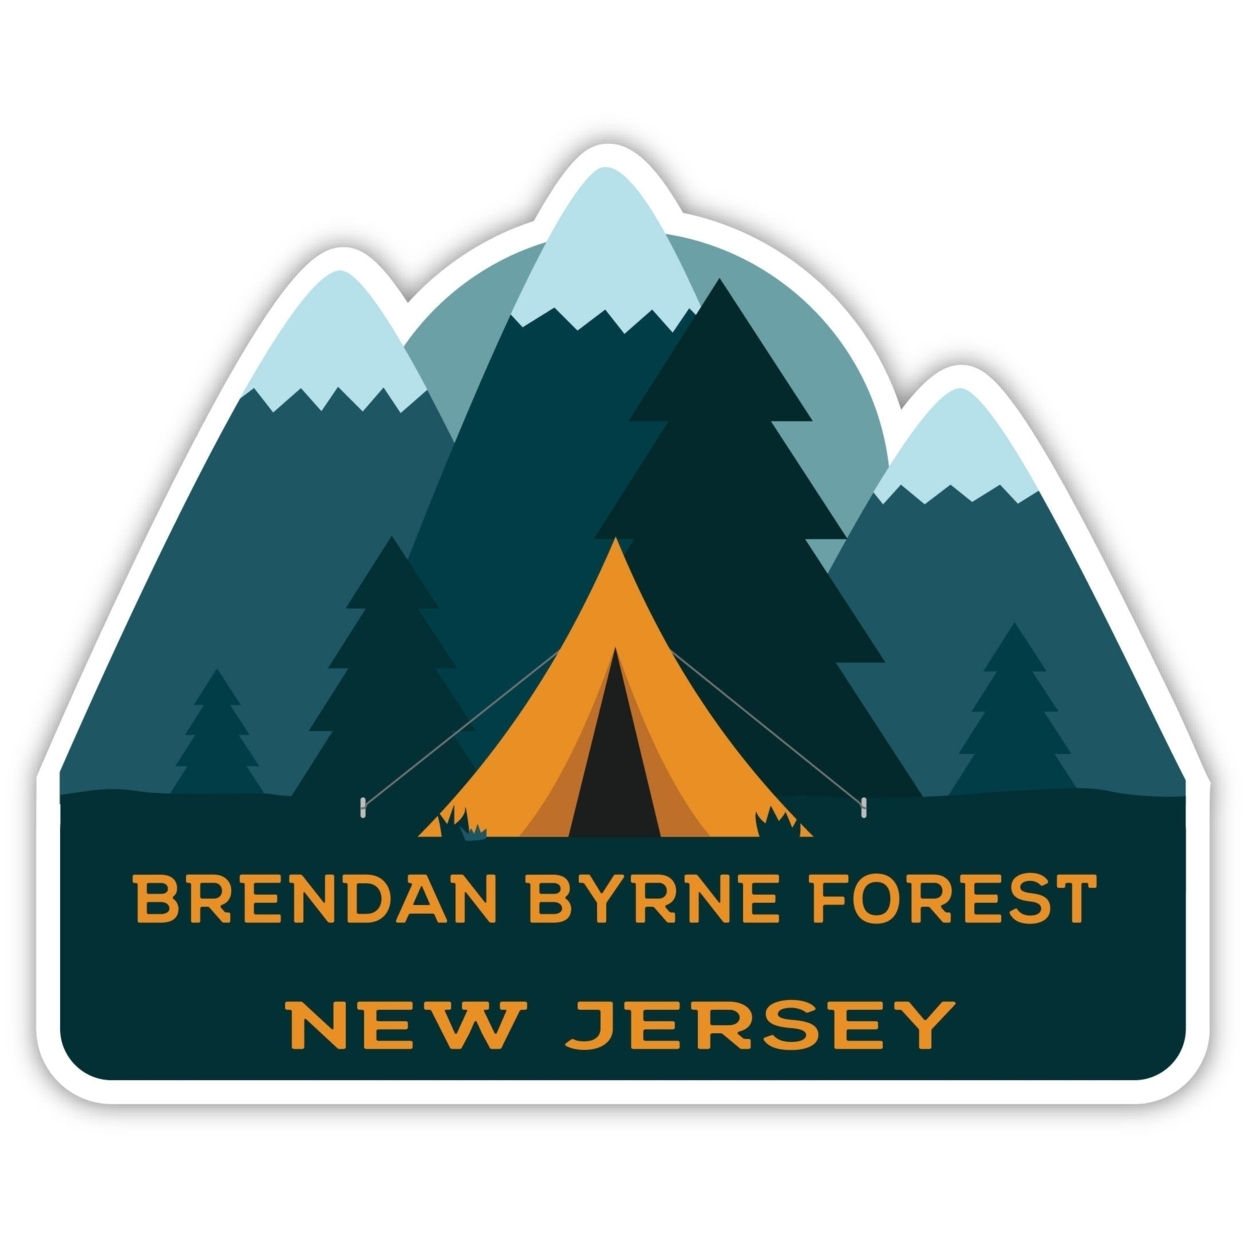 Brendan Byrne Forest New Jersey Souvenir Decorative Stickers (Choose Theme And Size) - 4-Pack, 12-Inch, Tent